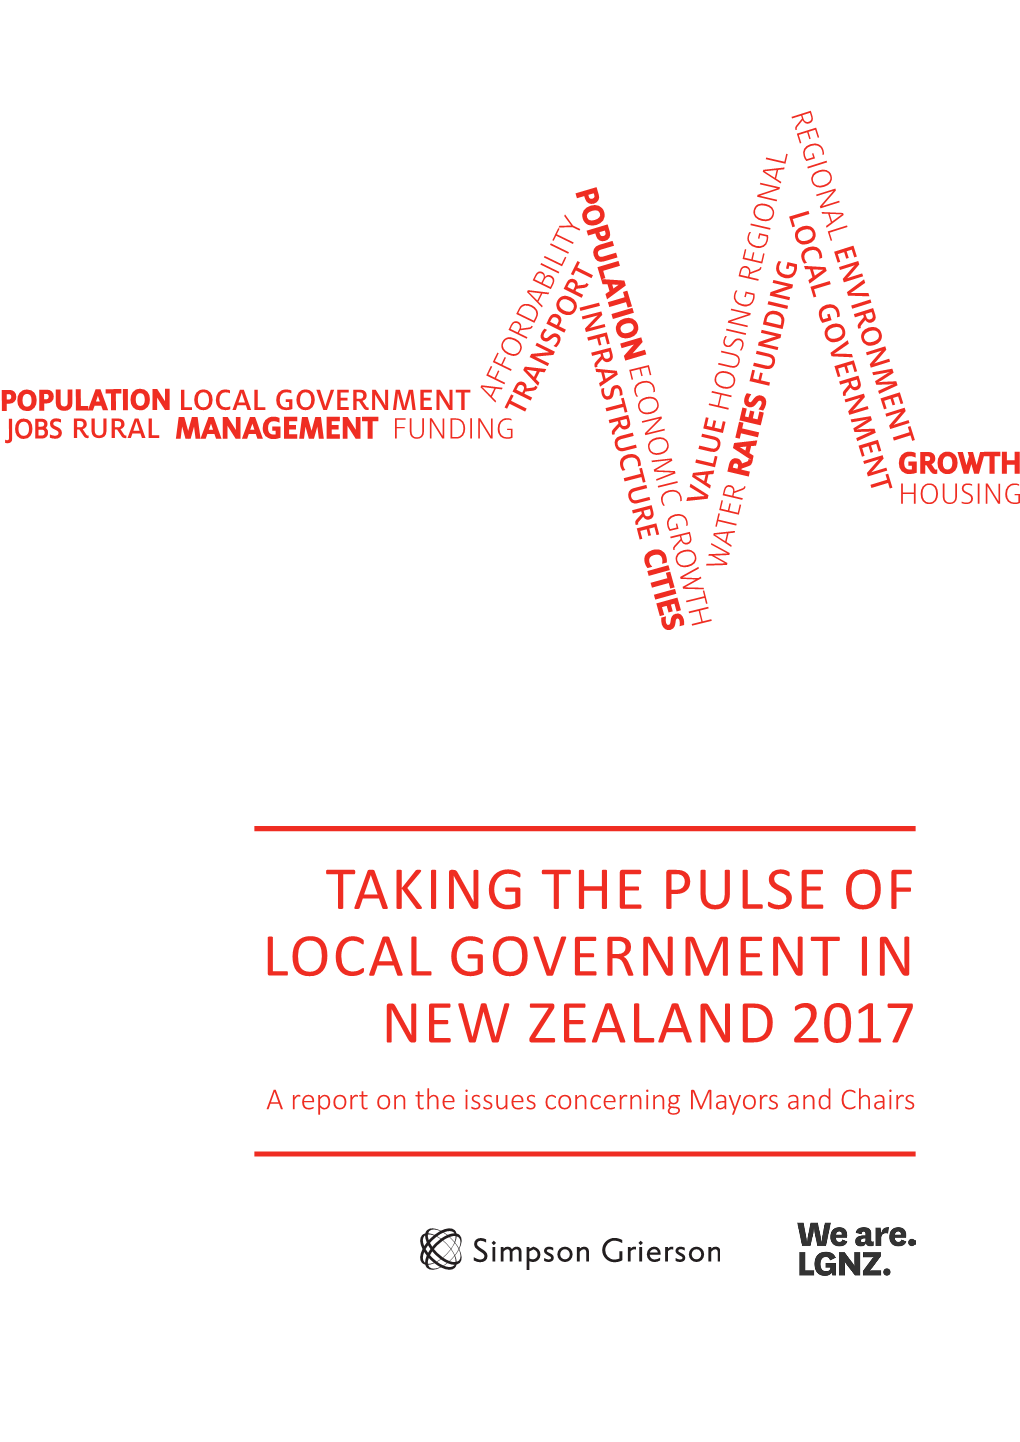 Taking the Pulse of Local Government in New Zealand 2017